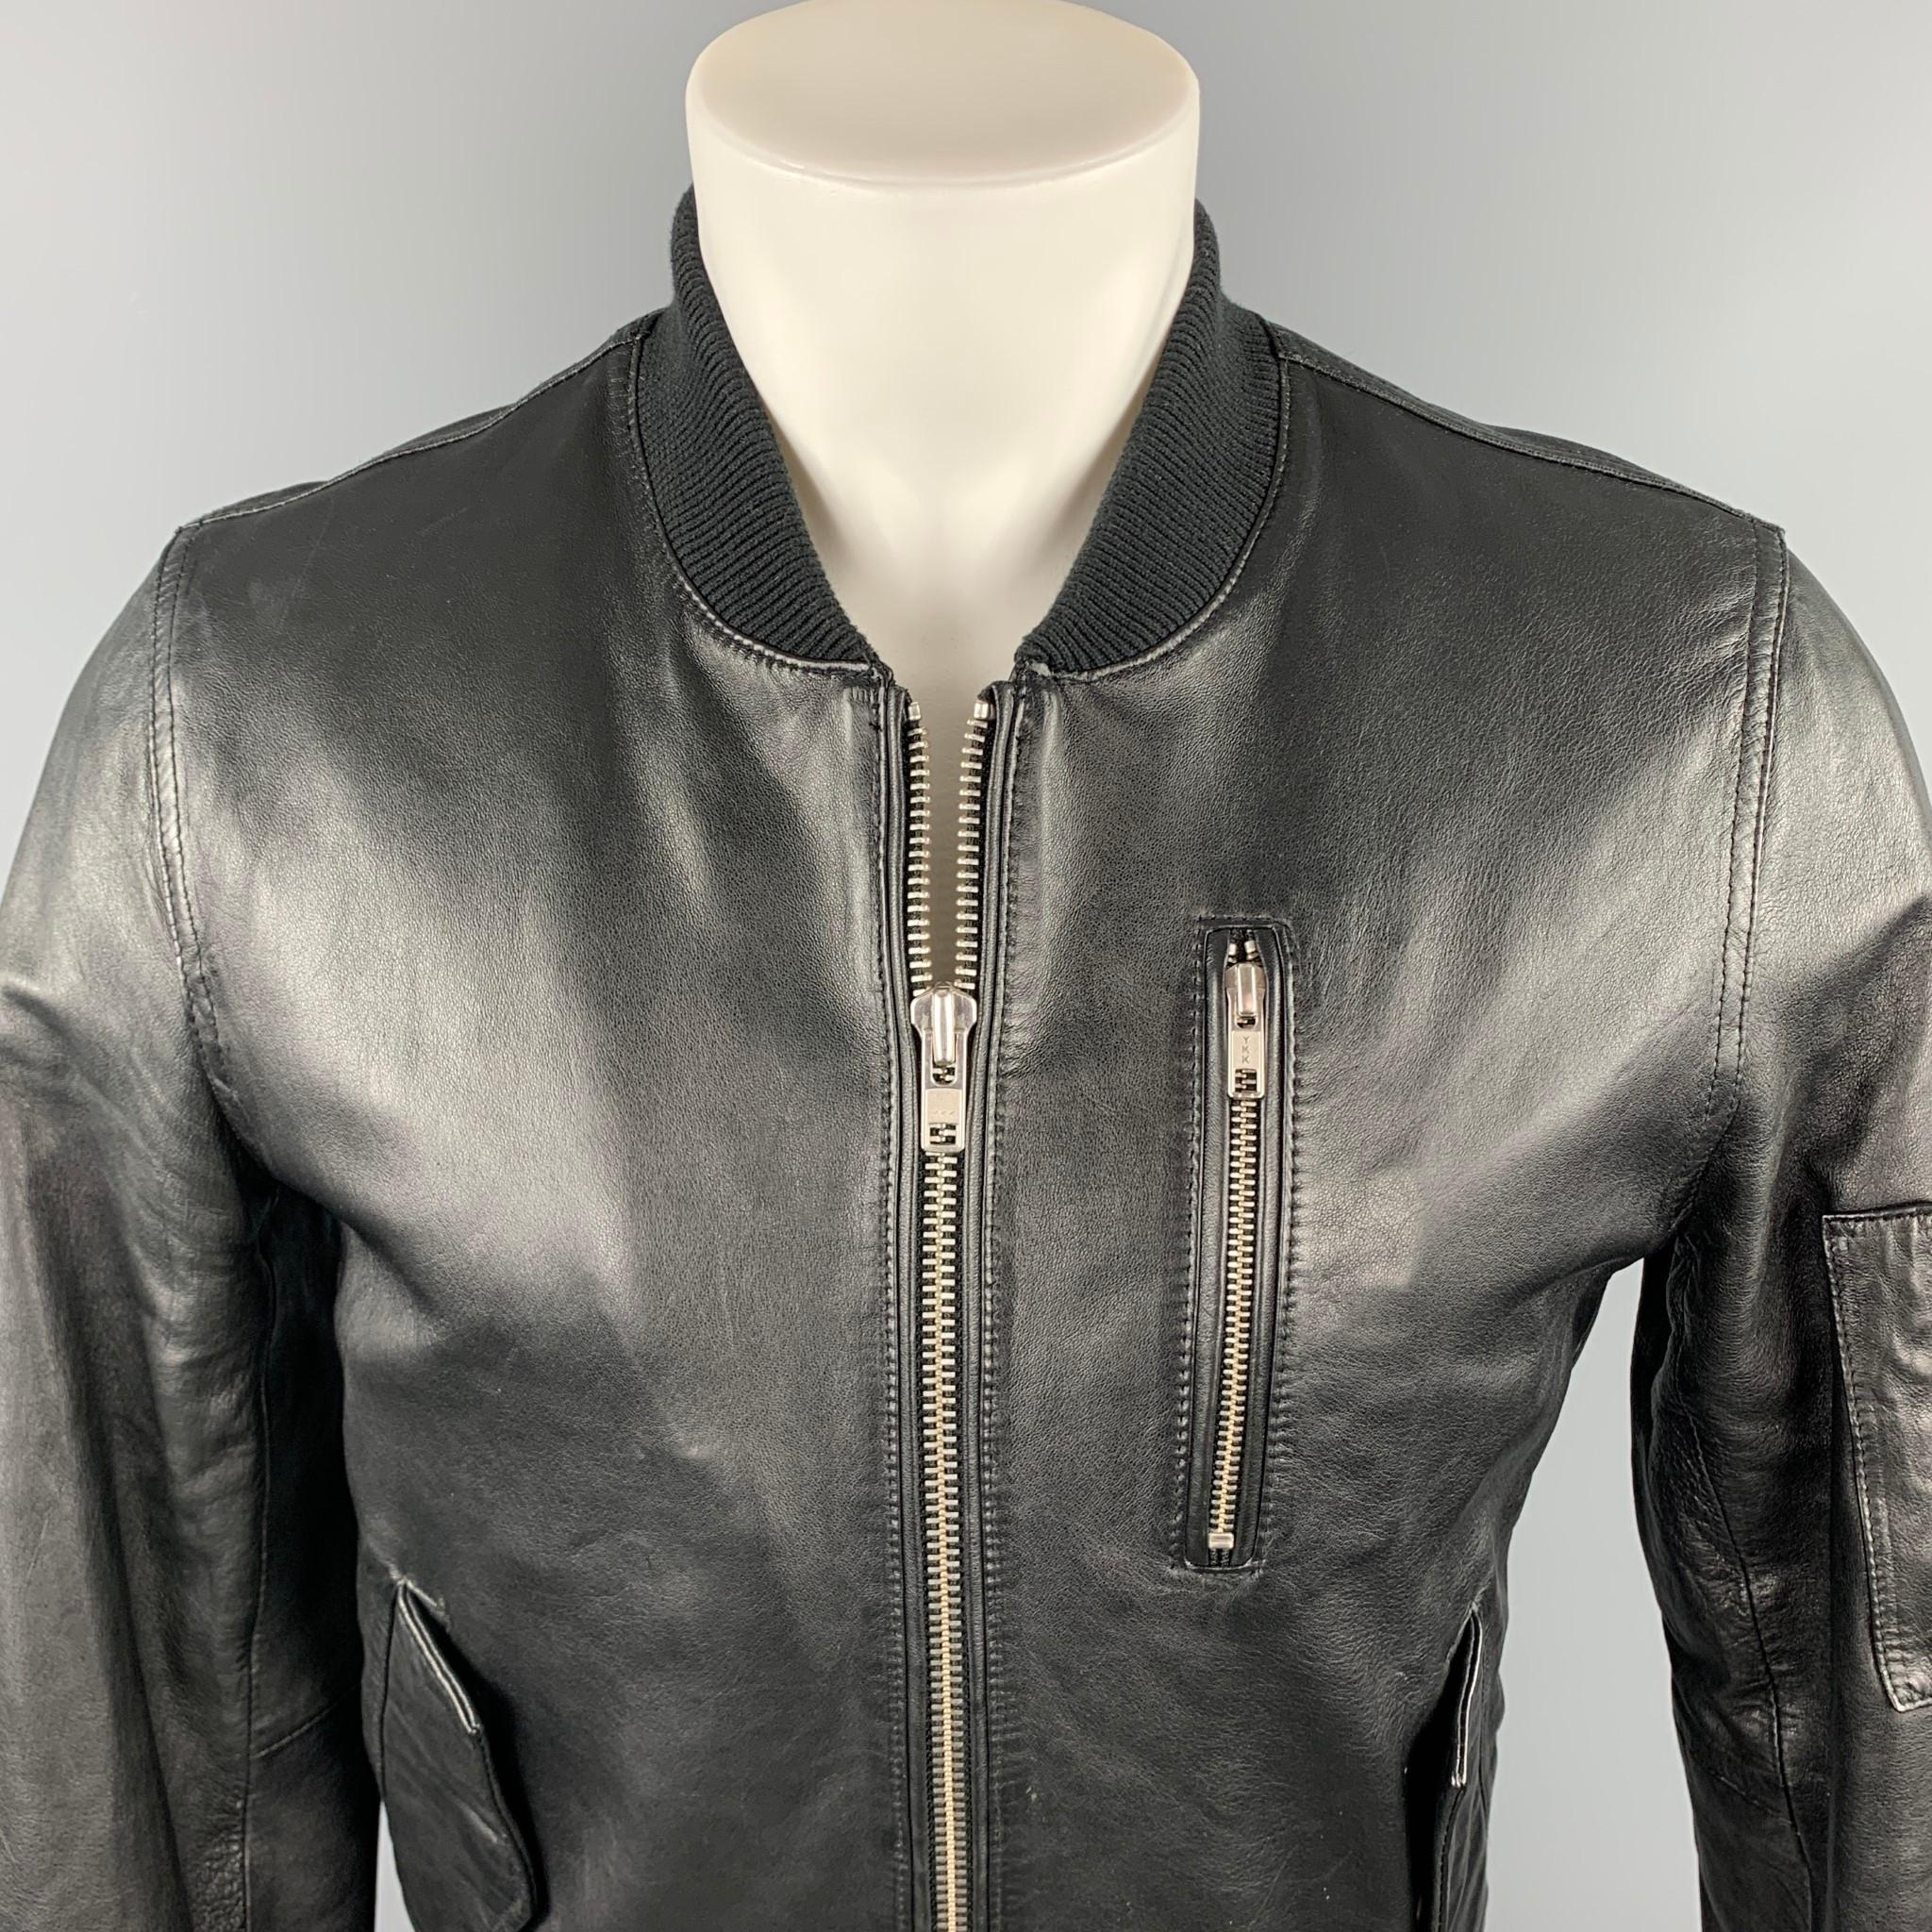 BLK DNM jacket comes in a black leather featuring a bomber style, ribbed hem, zipper pockets, and zip up closure. 

Excellent Pre-Owned Condition.
Marked: S

Measurements:

Shoulder: 17 in. 
Chest: 40 in. 
Sleeve: 29 in. 
Length: 23.5 in. 